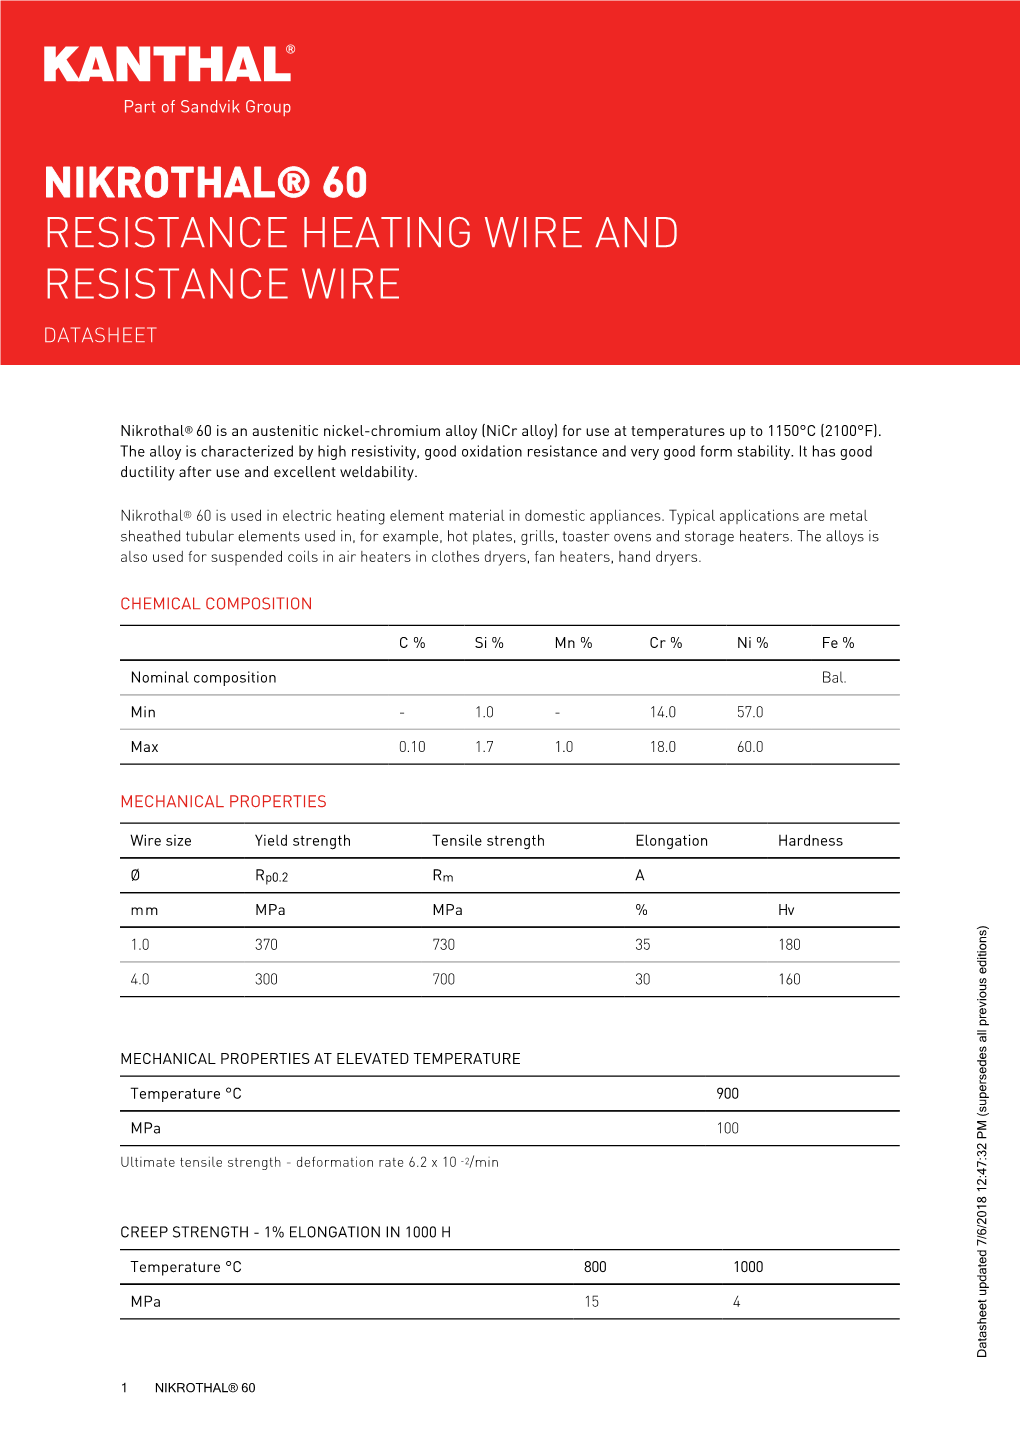 Nikrothal® 60 Resistance Heating Wire and Resistance Wire Datasheet